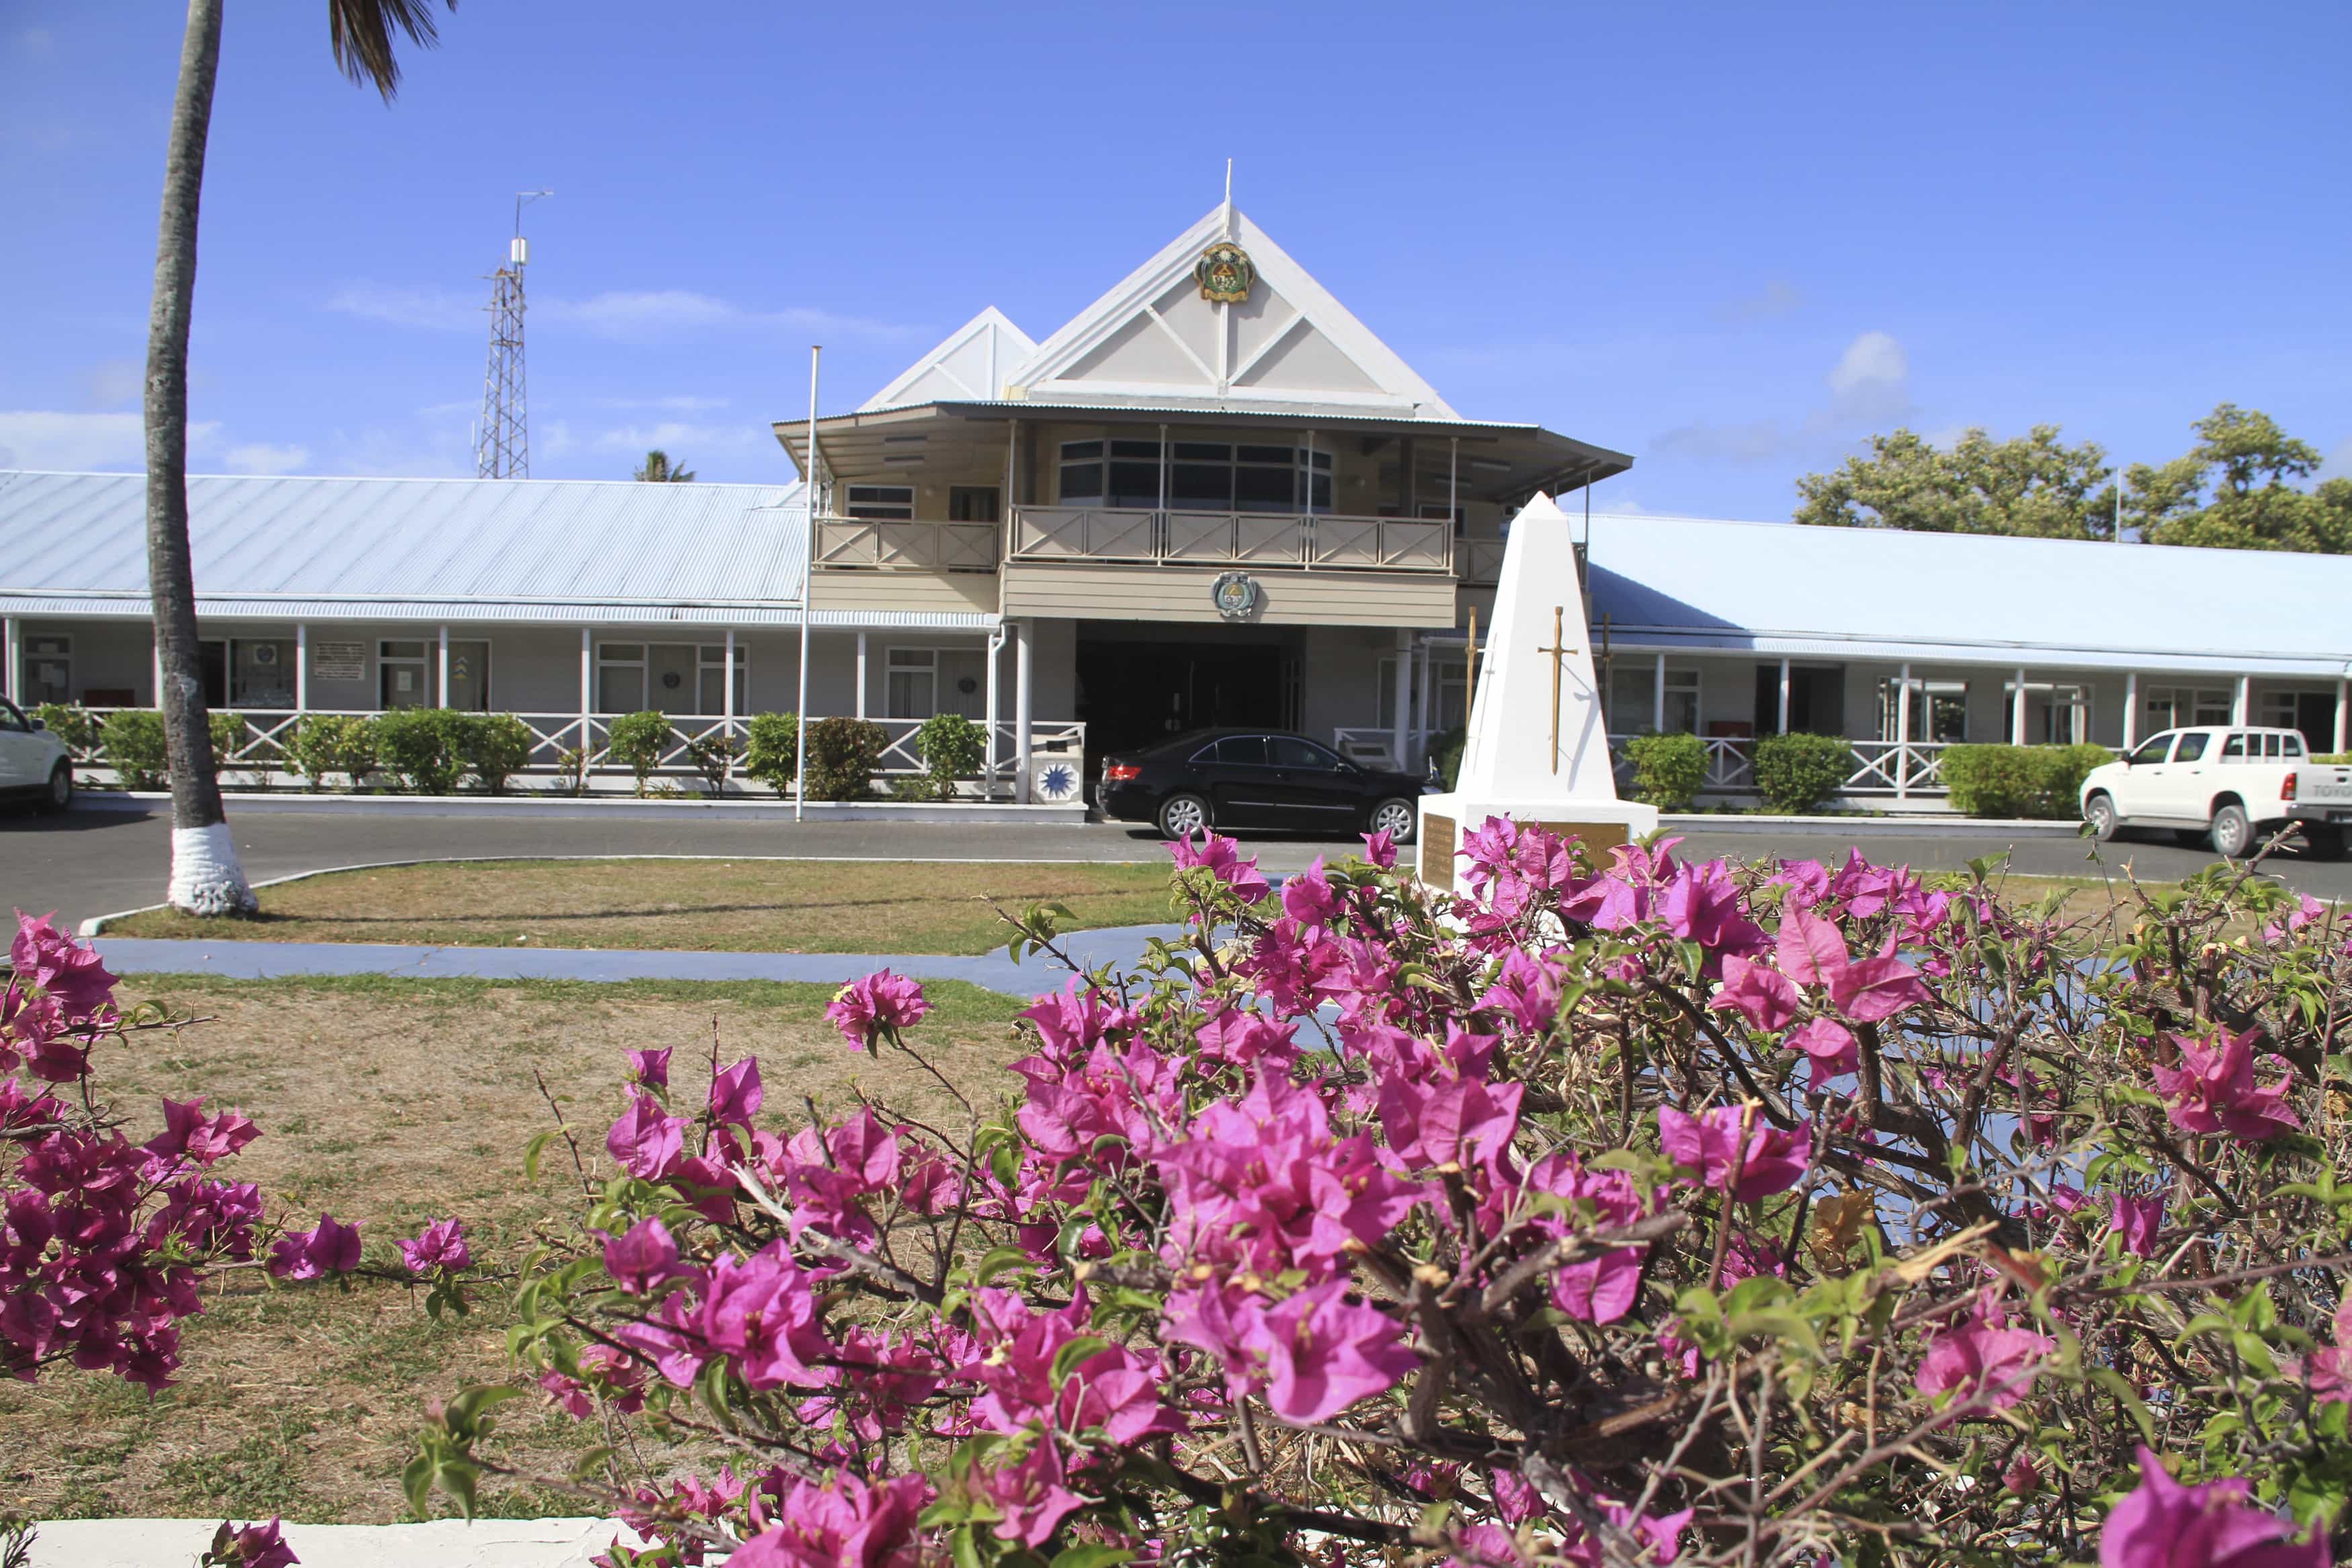 An exterior view of the government offices of the island nation of Nauru is pictured, 10 February 2012, REUTERS/Rod Henshaw